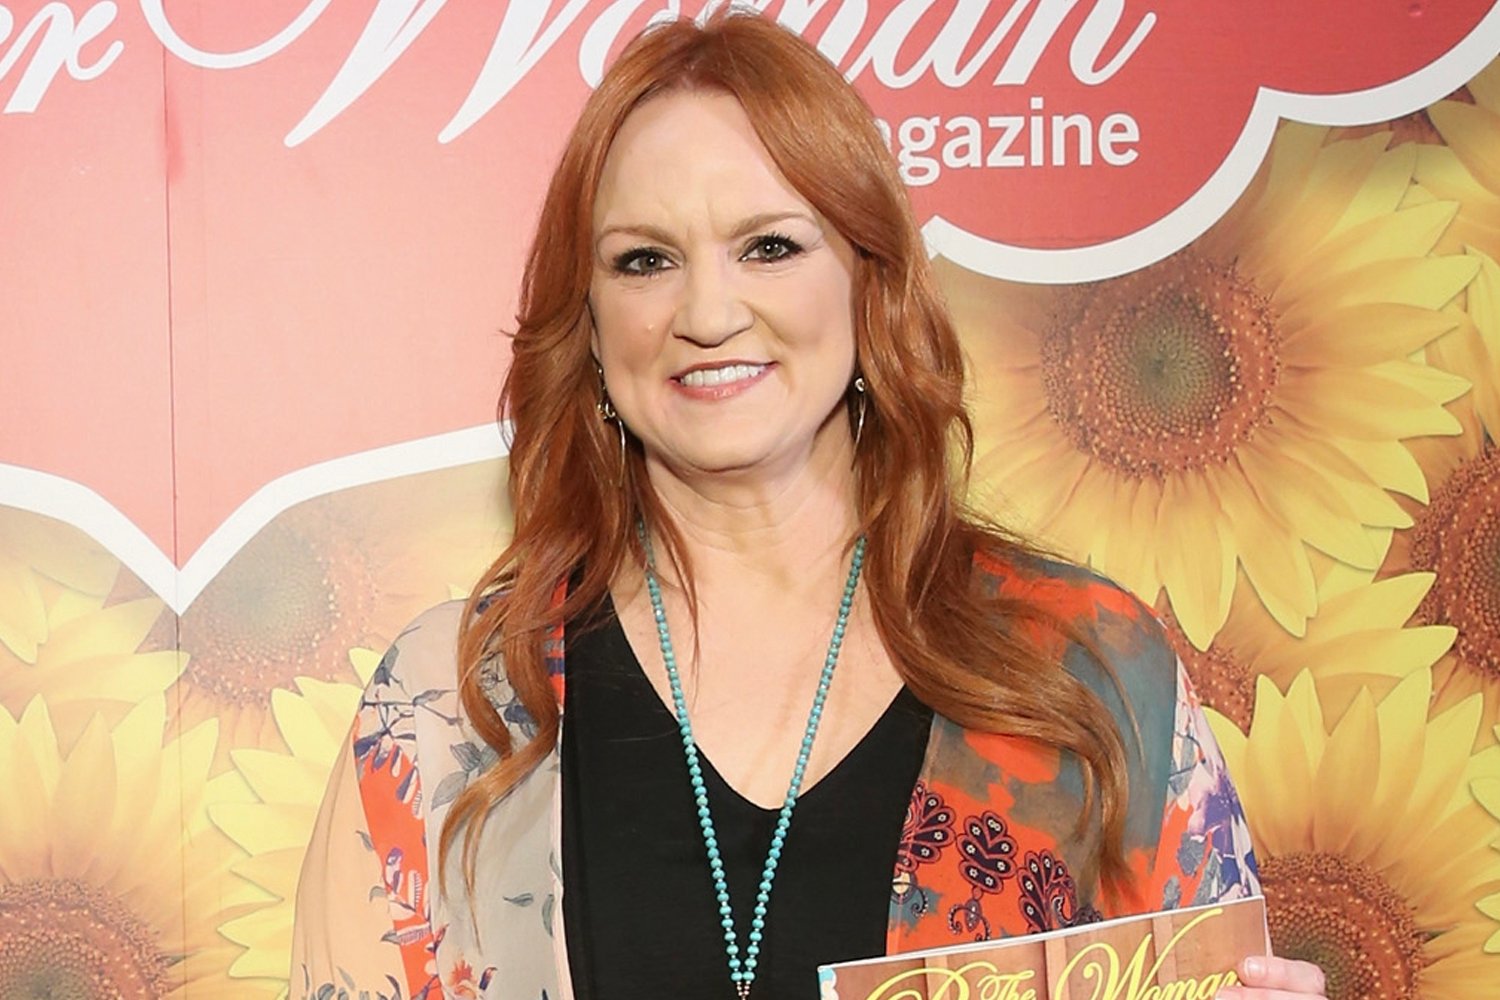 Ree Drummond smiles holding a copy of 'The Pioneer Woman Magazine'